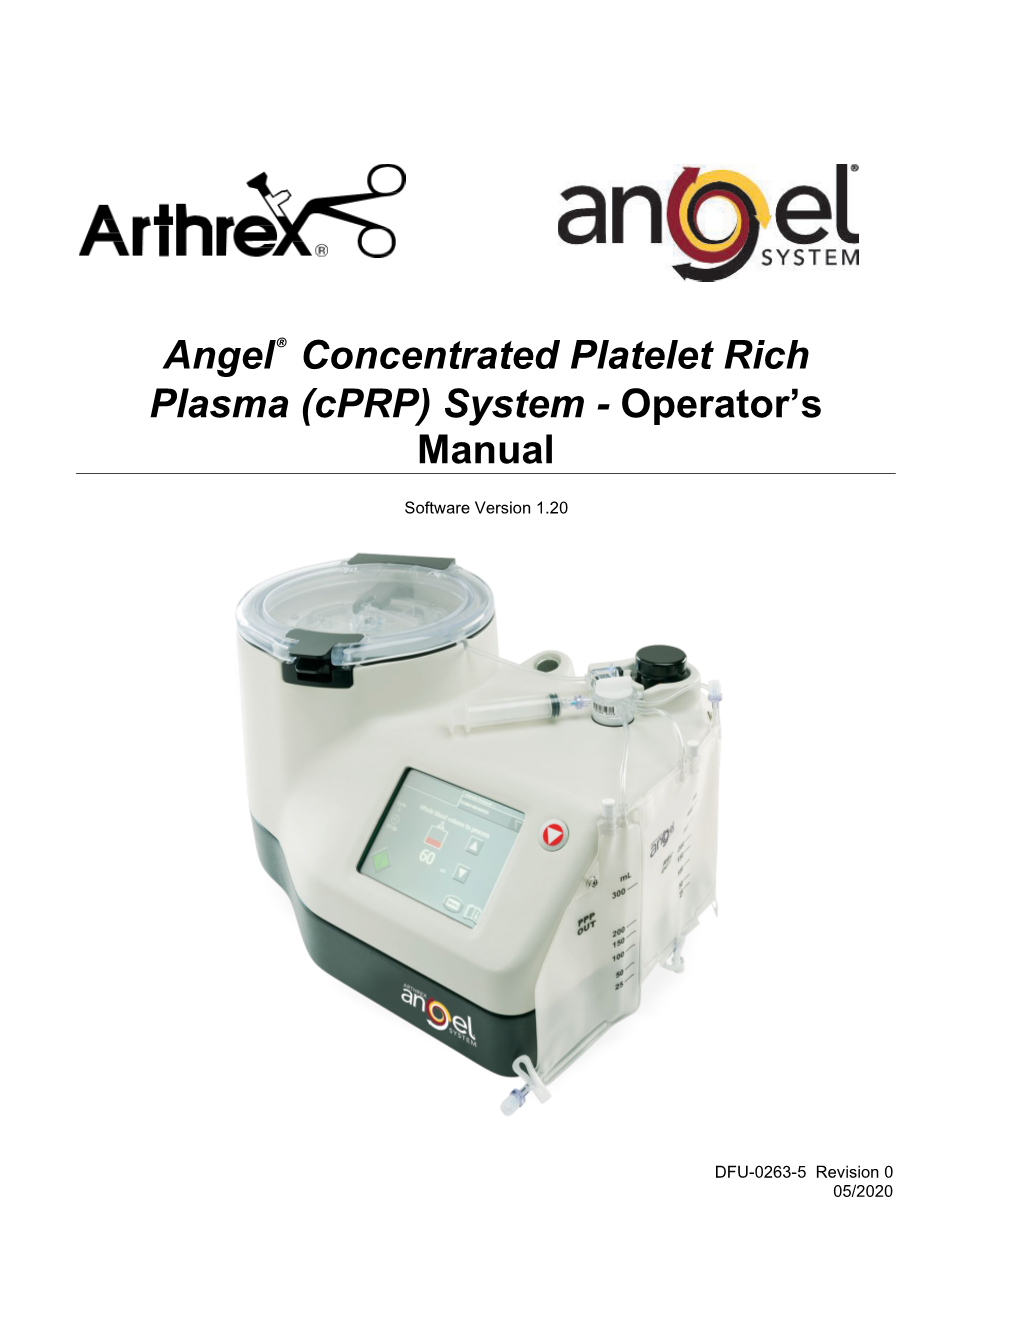 Angel® Concentrated Platelet Rich Plasma (Cprp) System - Operator’S Manual